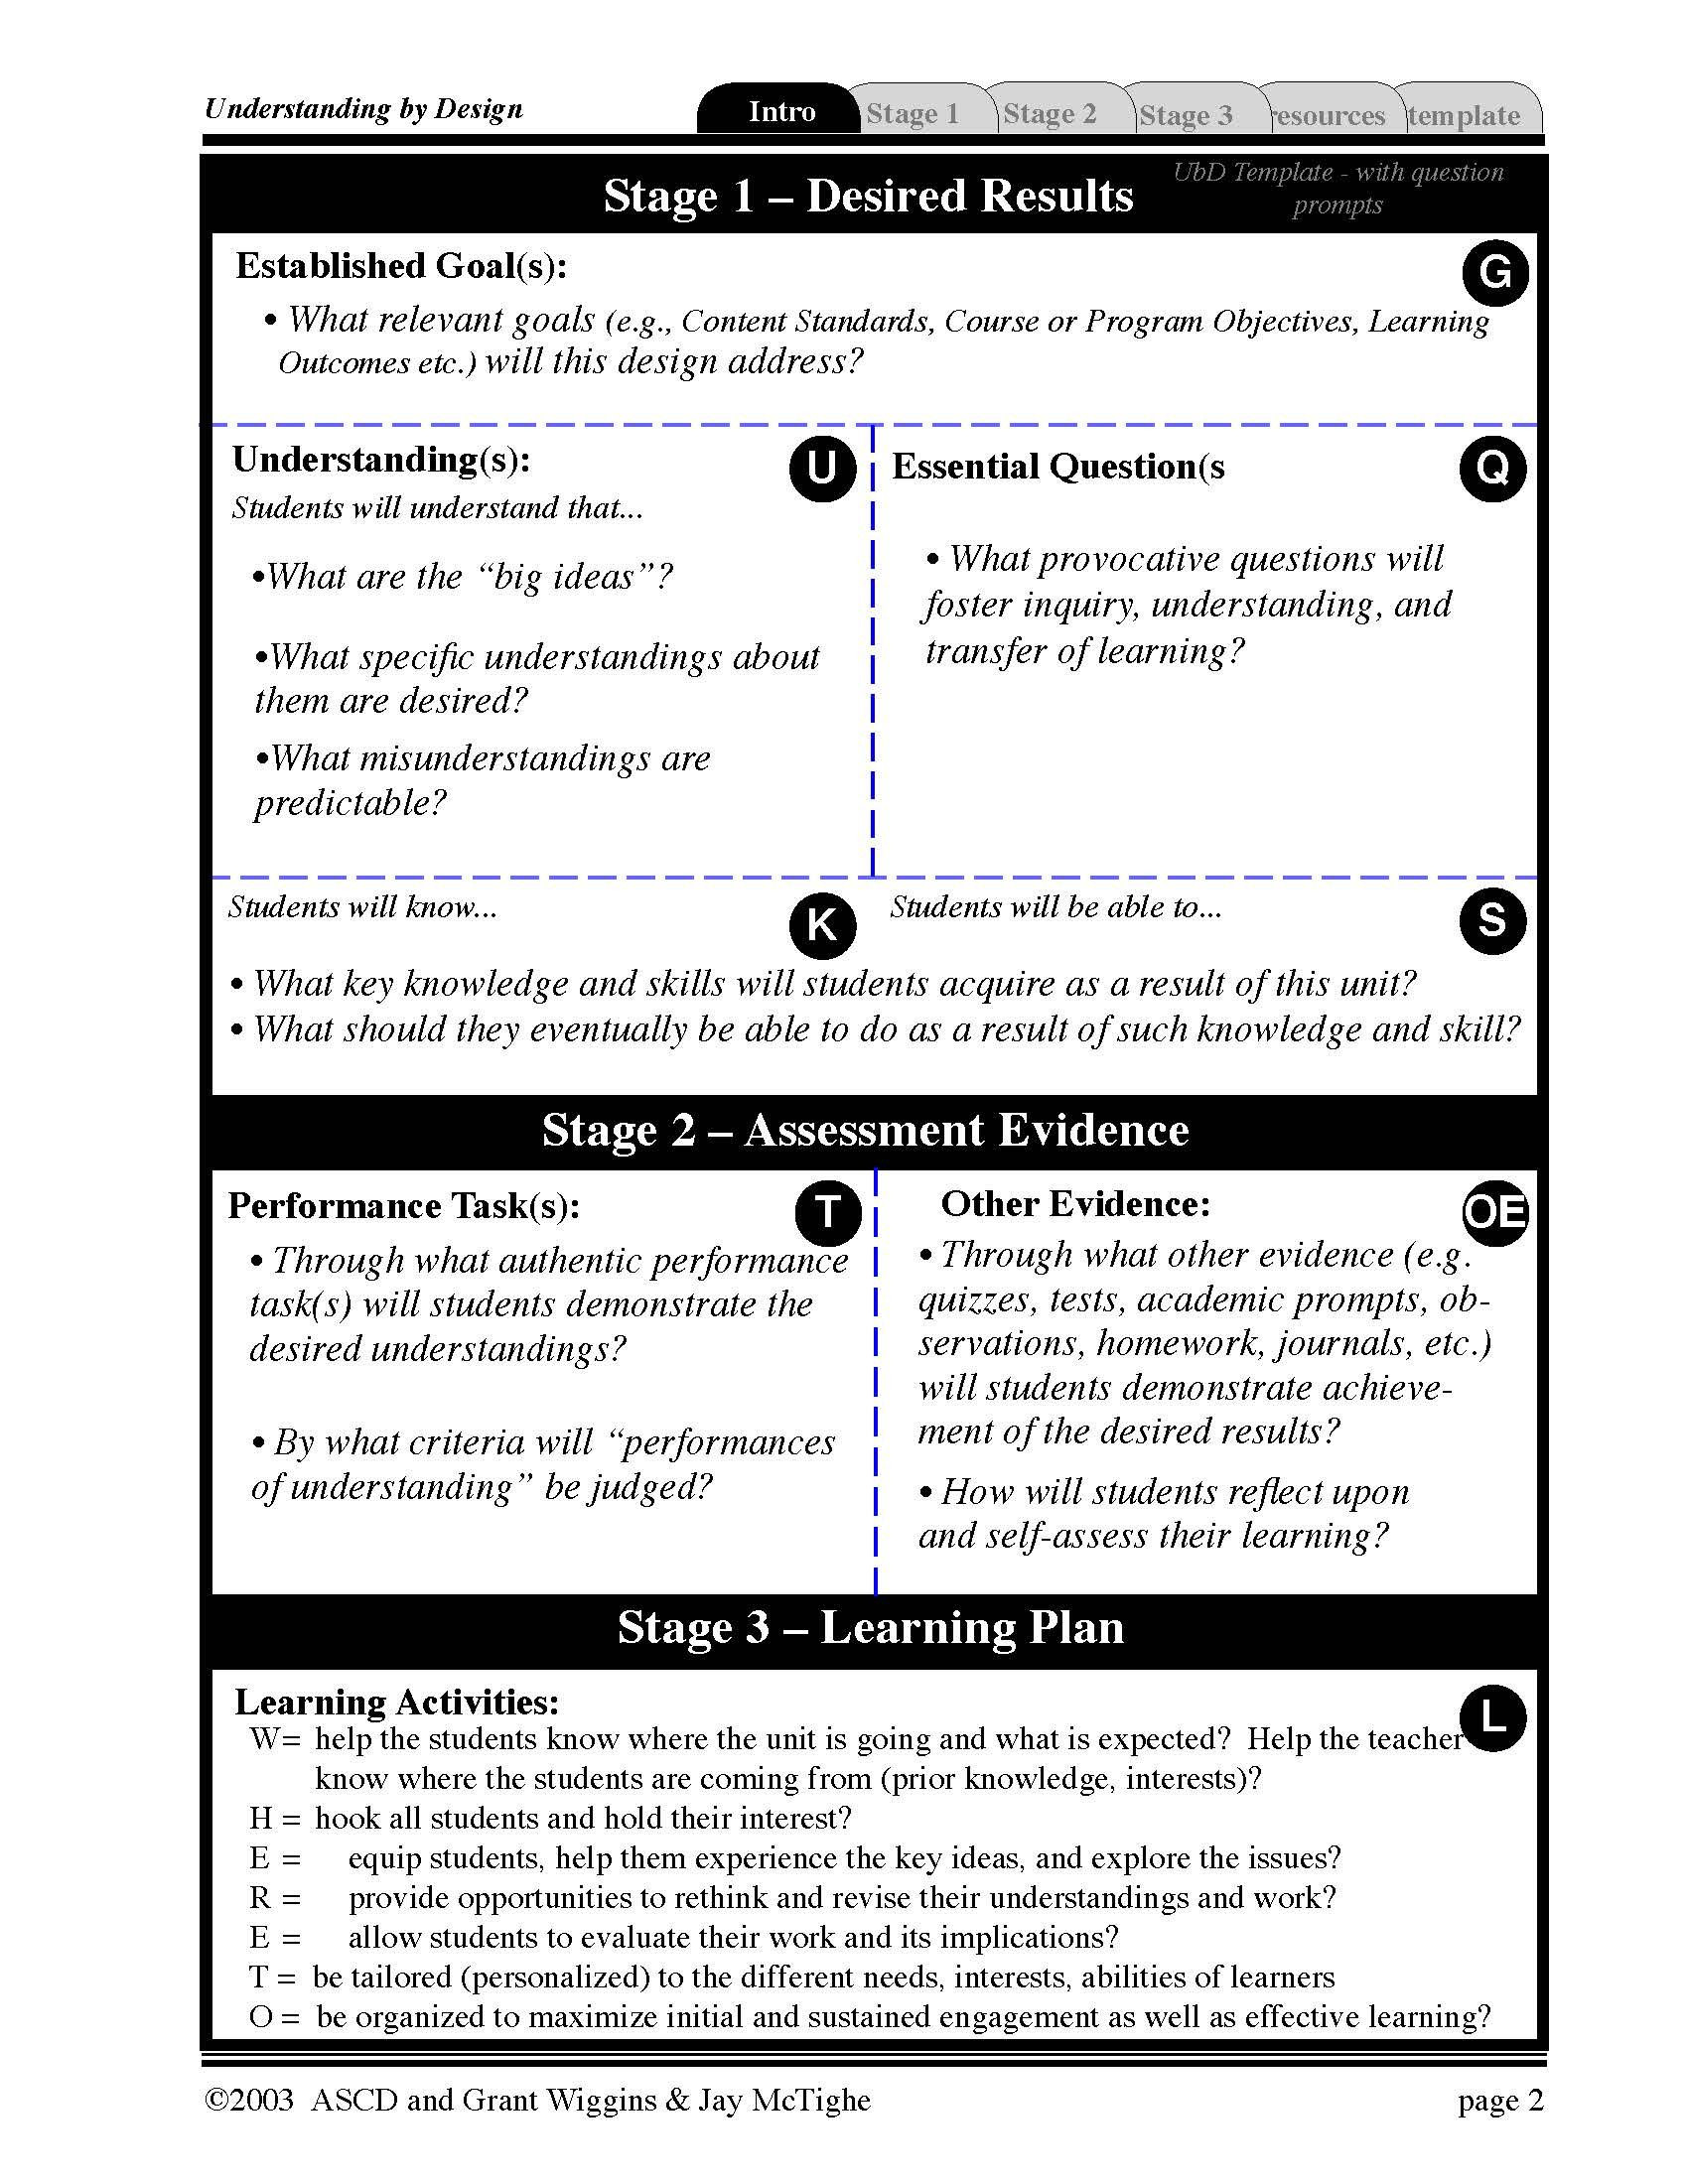 Ubd Lesson Plan Ubd Plan with Images